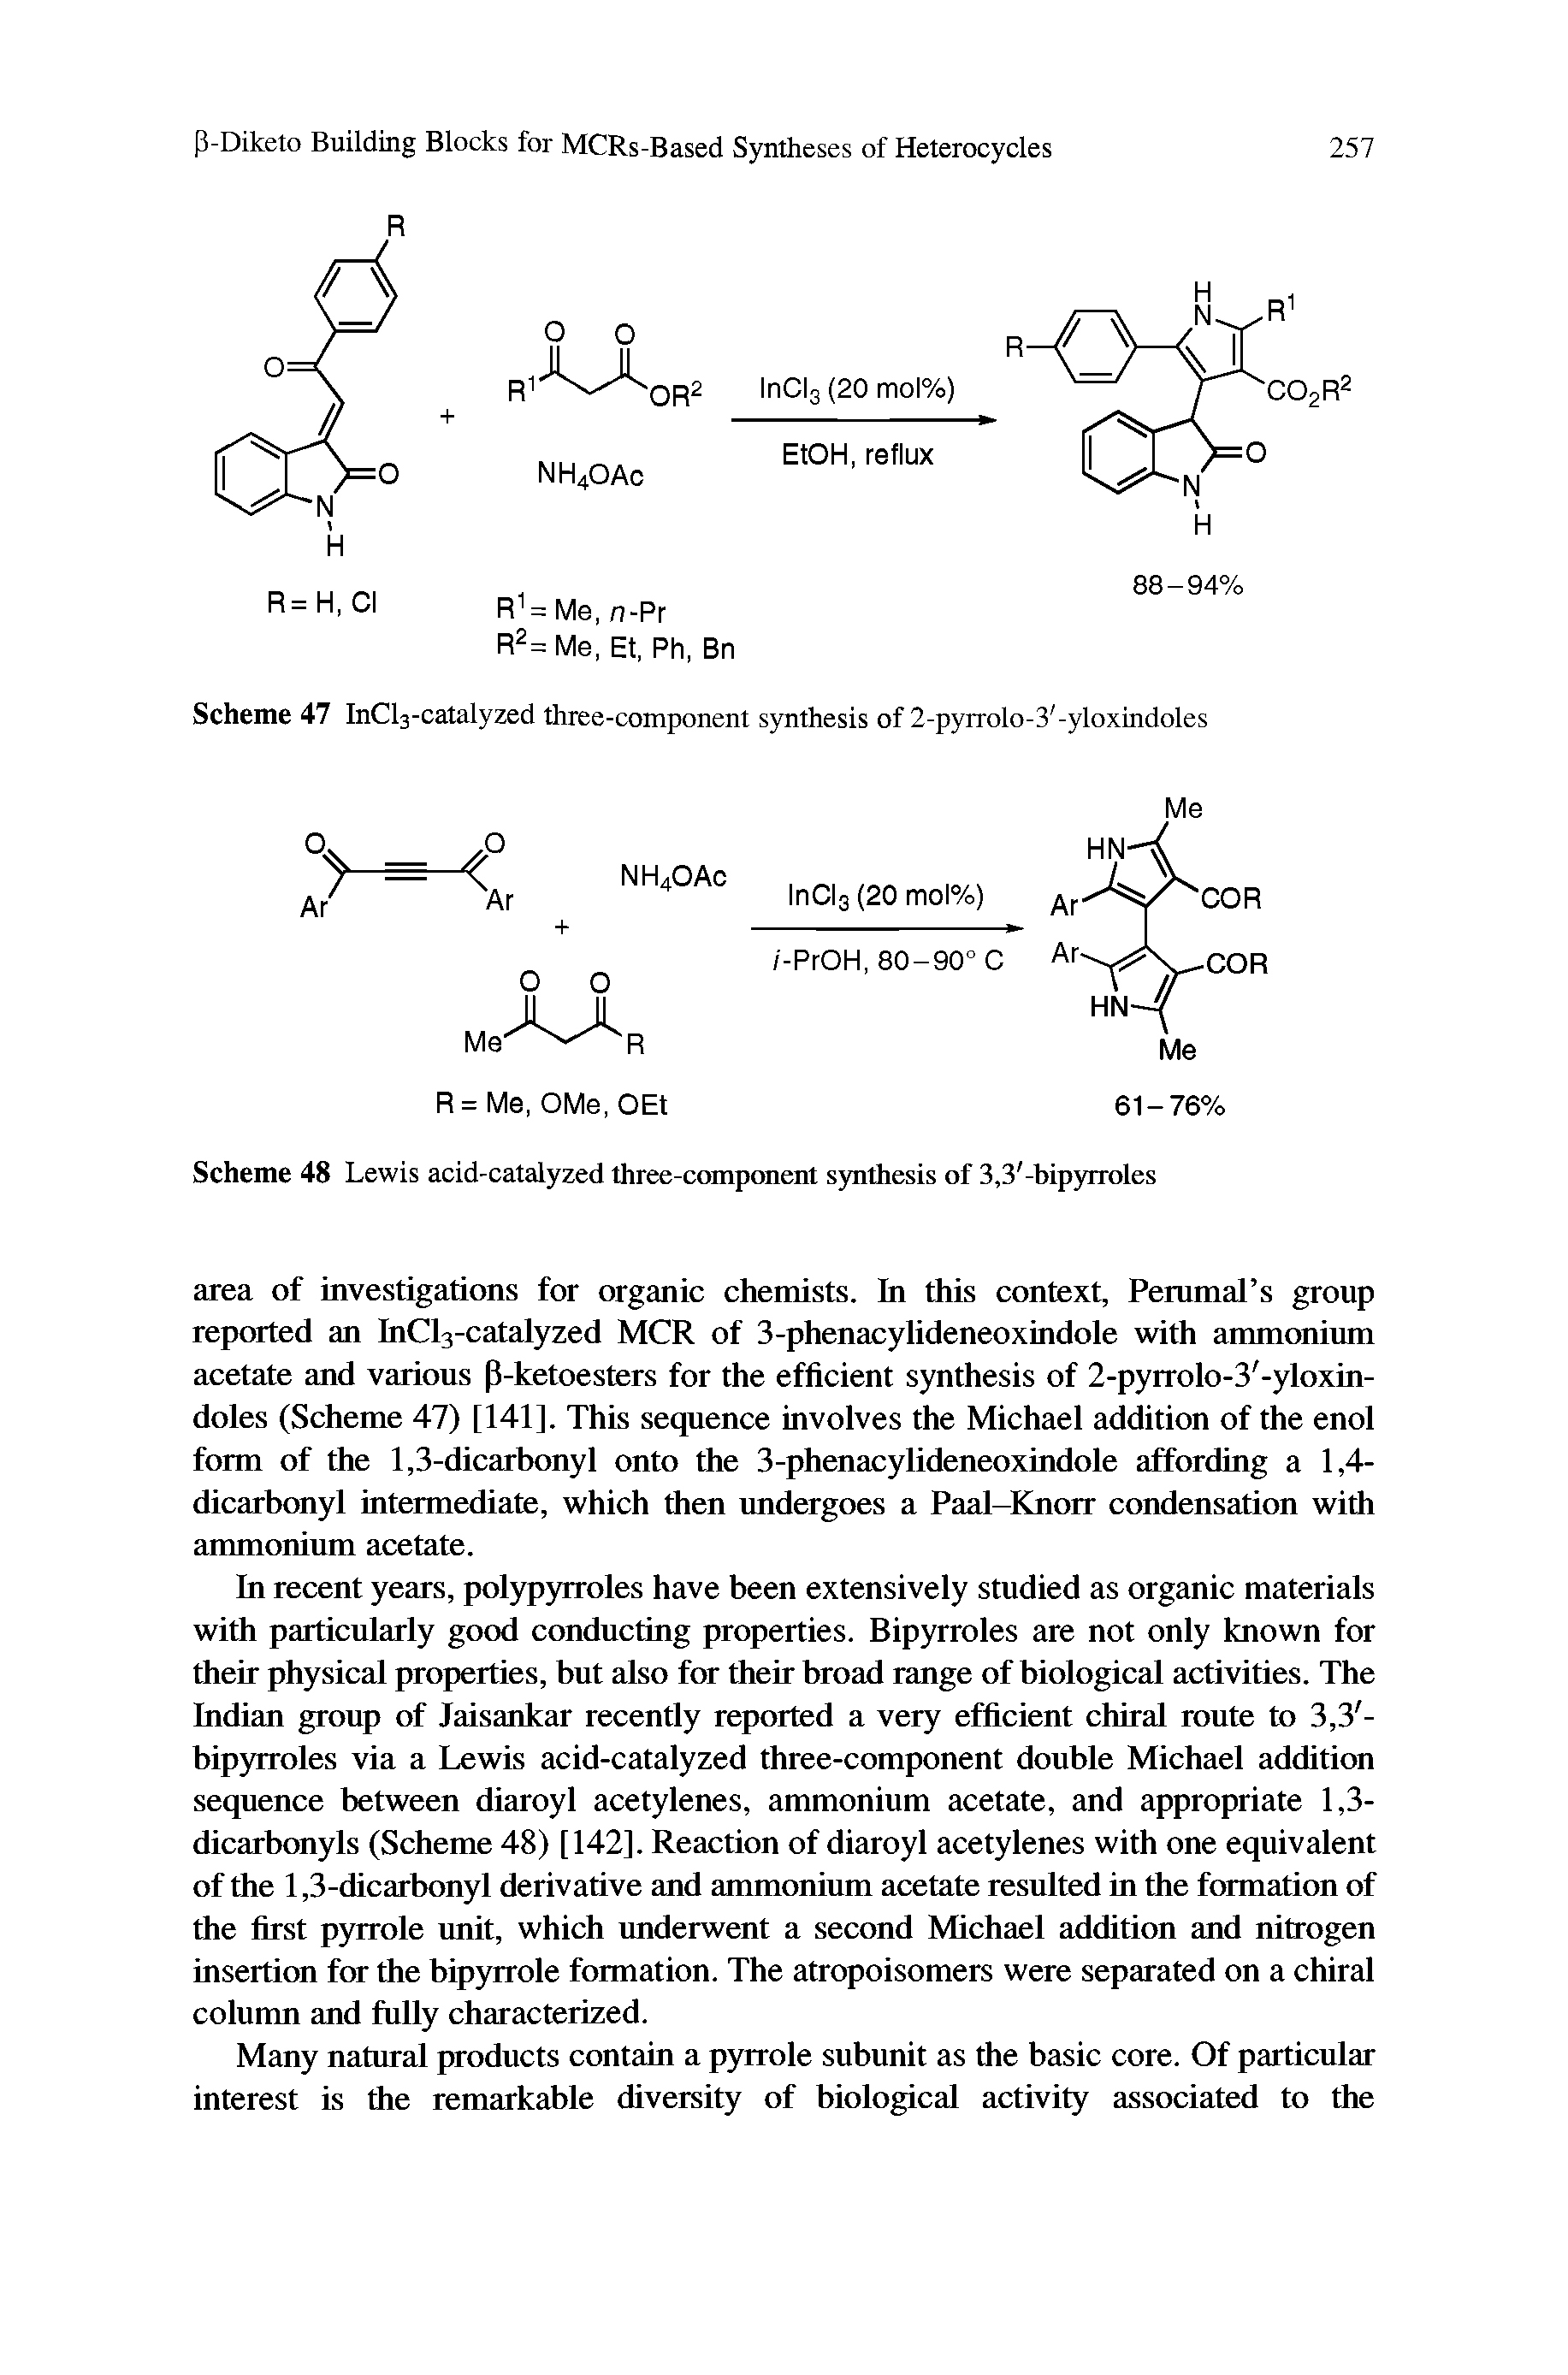 Scheme 48 Lewis acid-catalyzed three-component synthesis of 3,3 -bipyrroles...